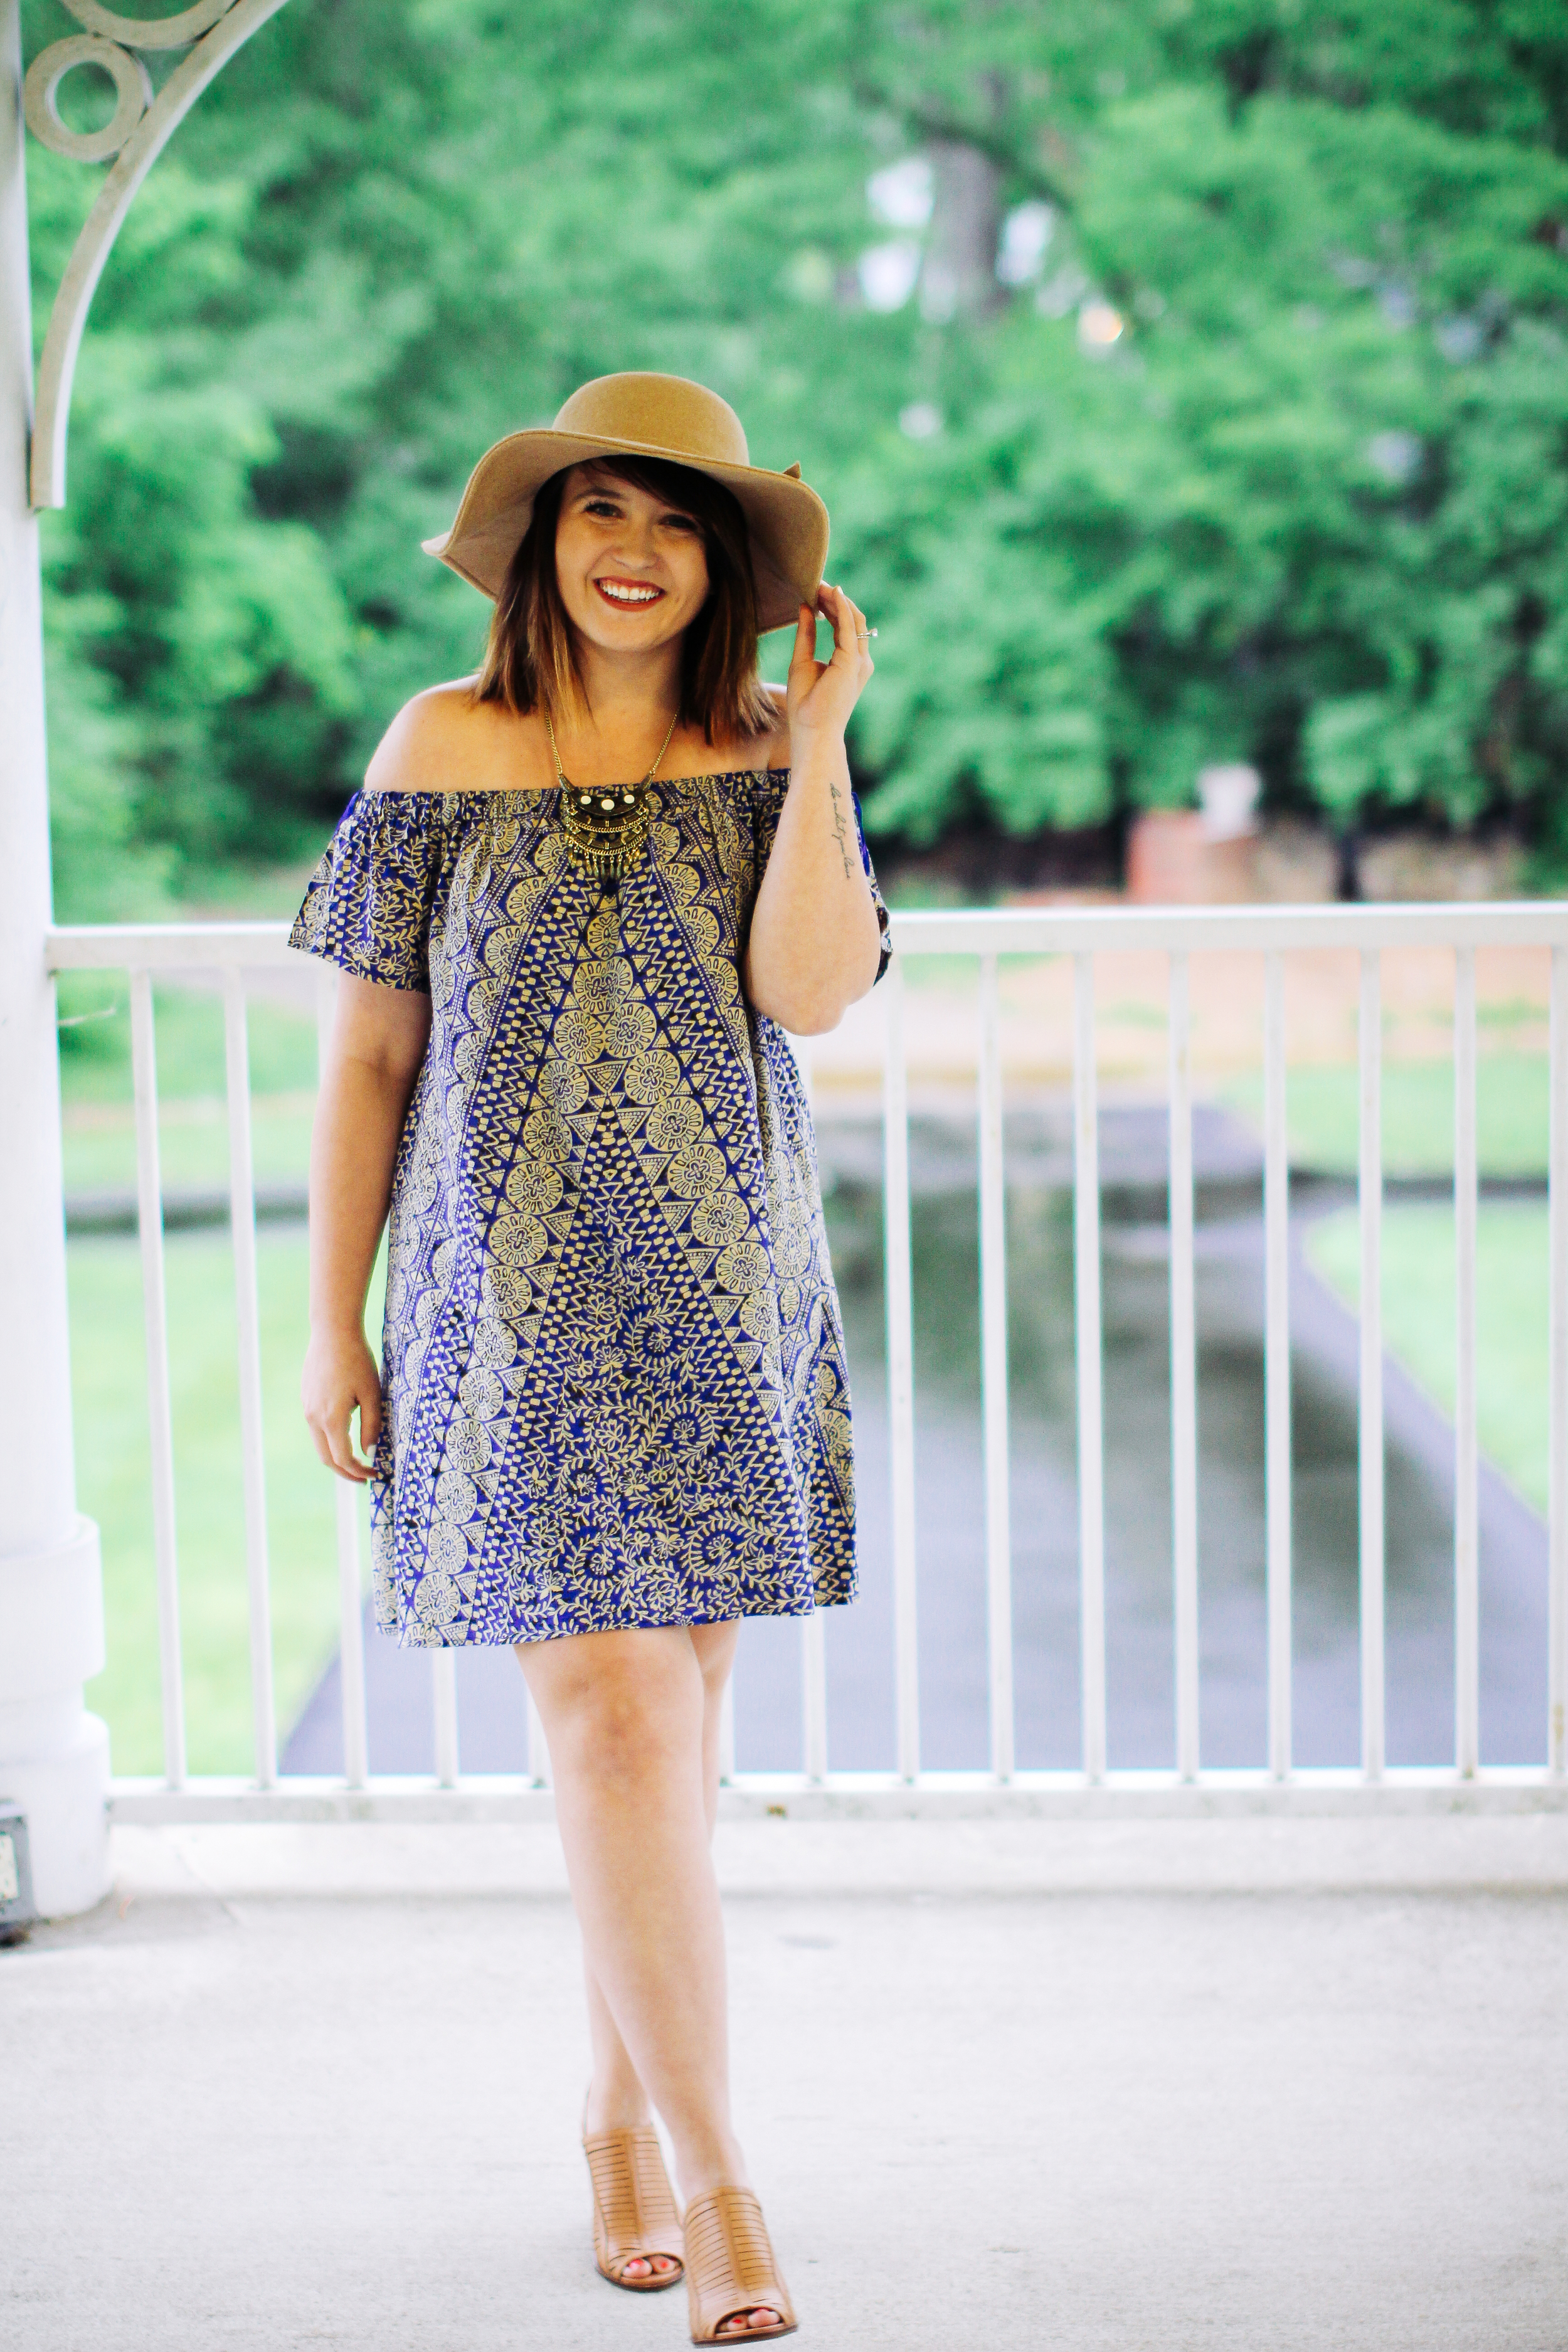 Cold Shoulder Urban Outfitters Dress Summer Style via www.chelceytate.com